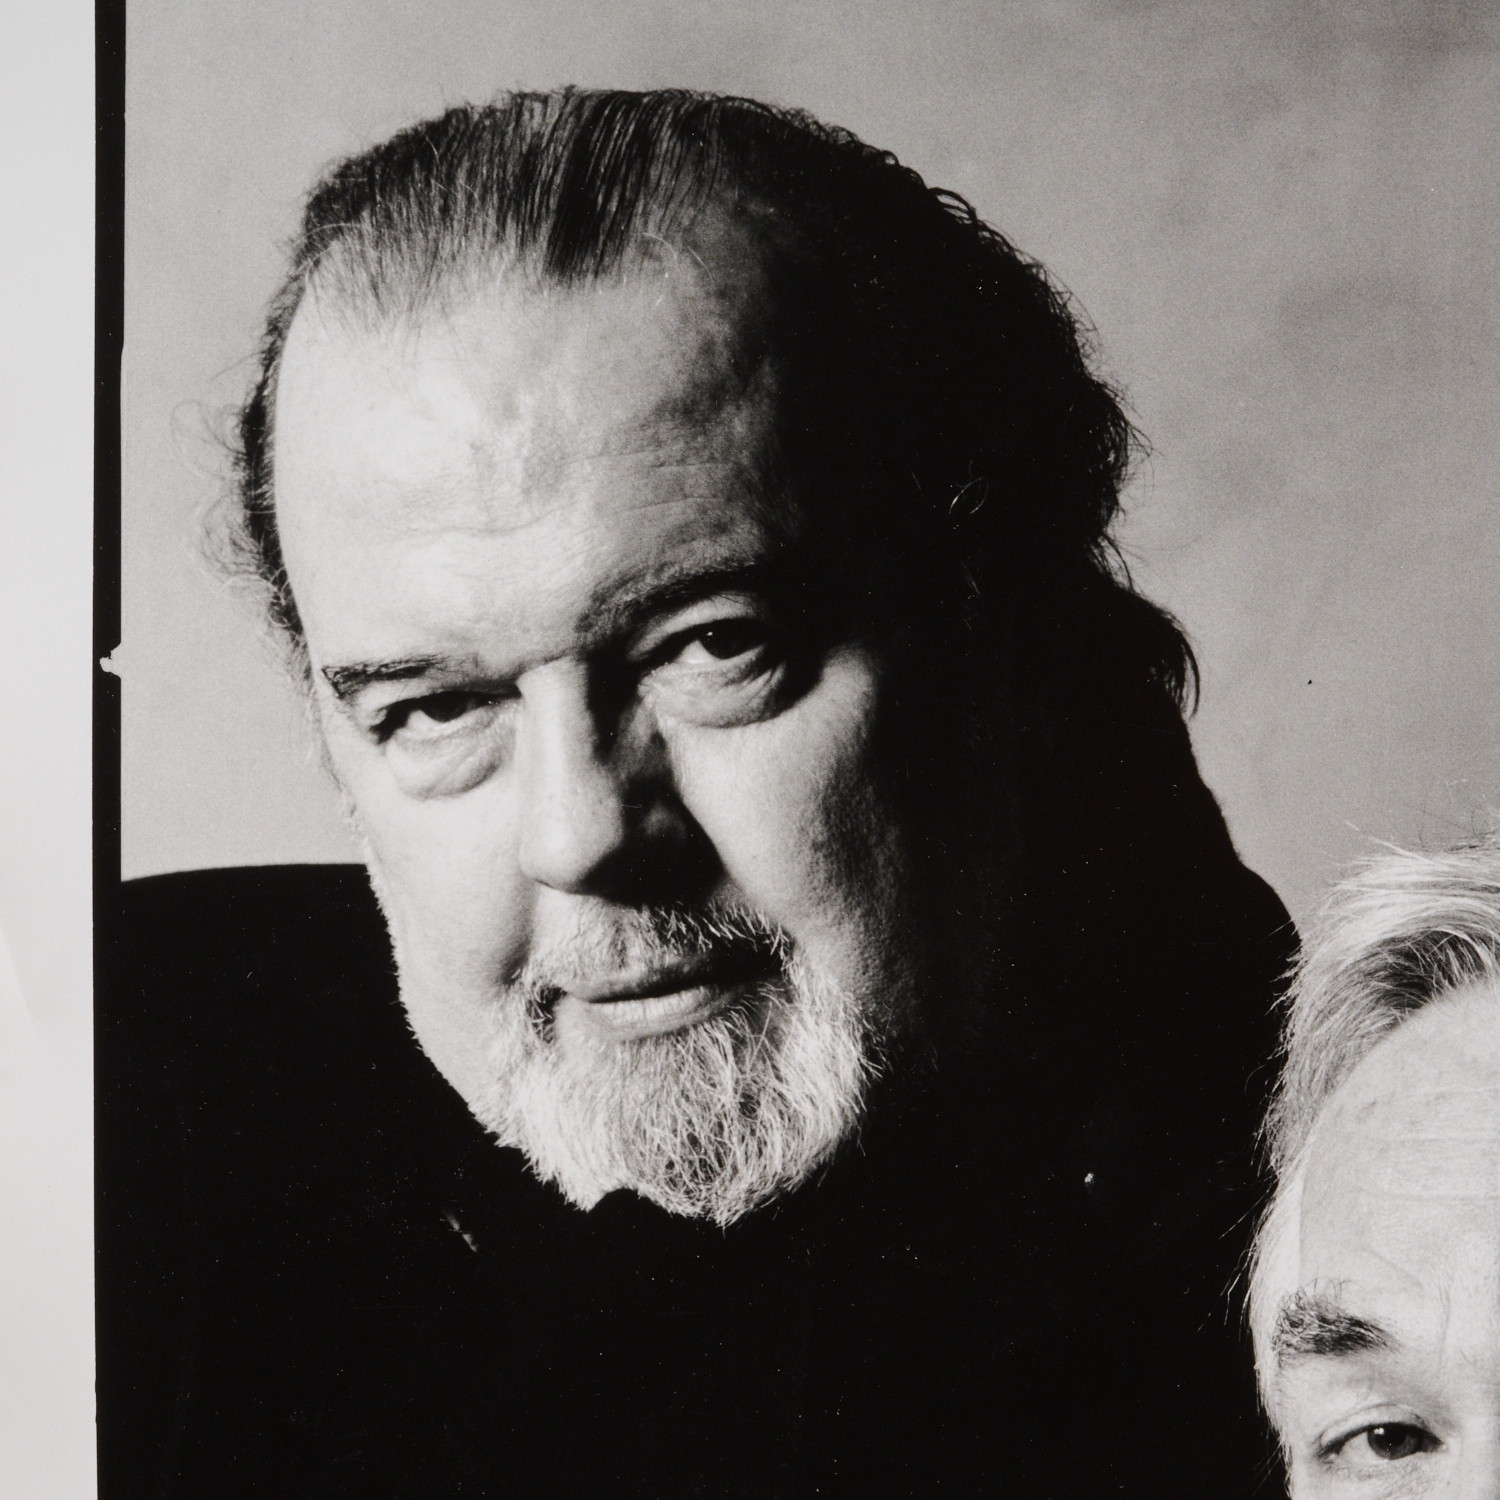 Artwork by Irving Penn, Portrait of Orson Welles and Peter Bogdanovich, Made of gelatin silver photograph